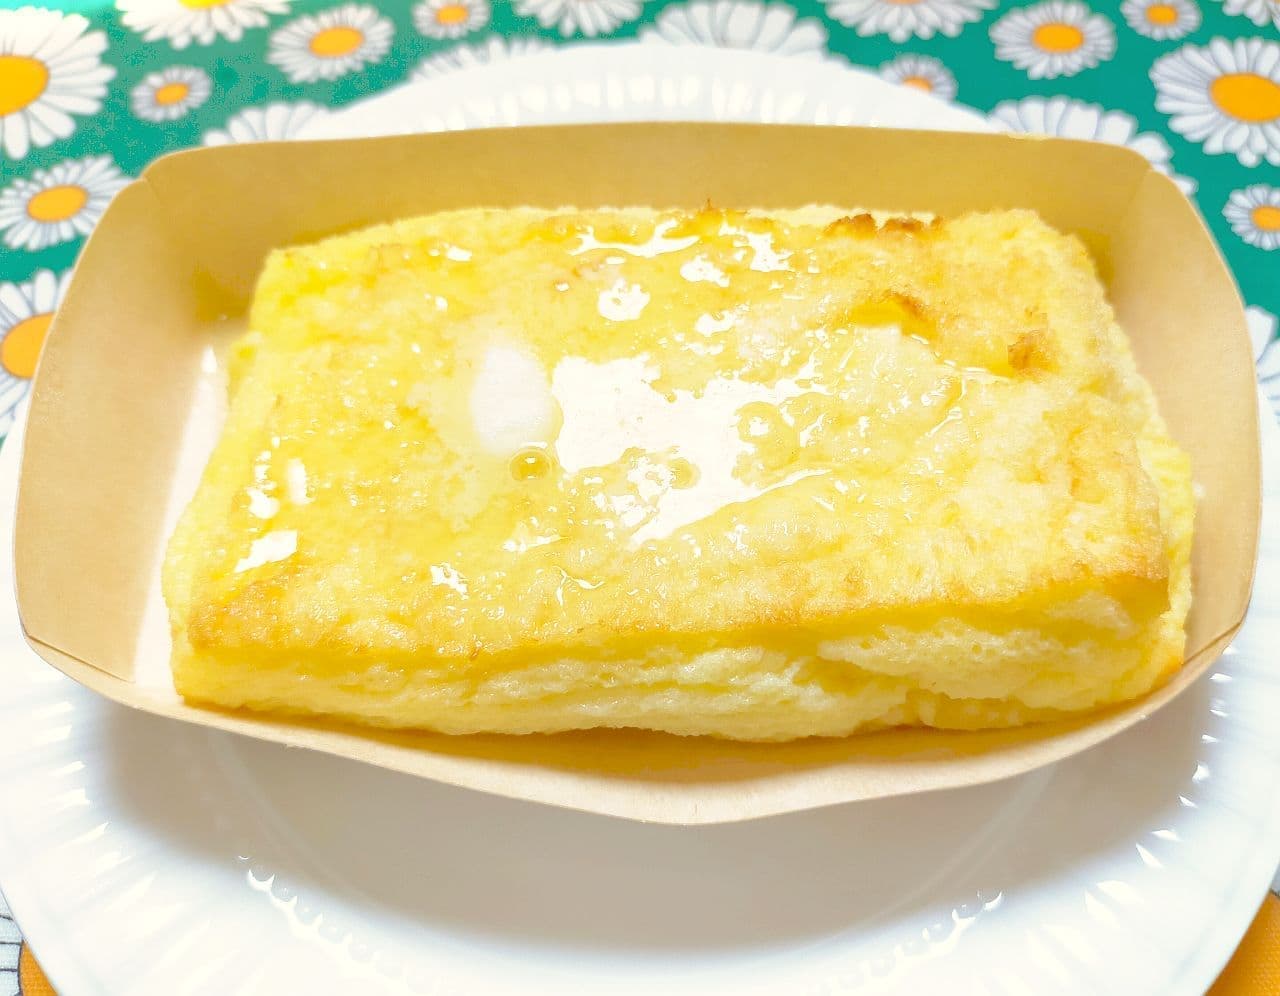 7-ELEVEN "French toast that melts softly"